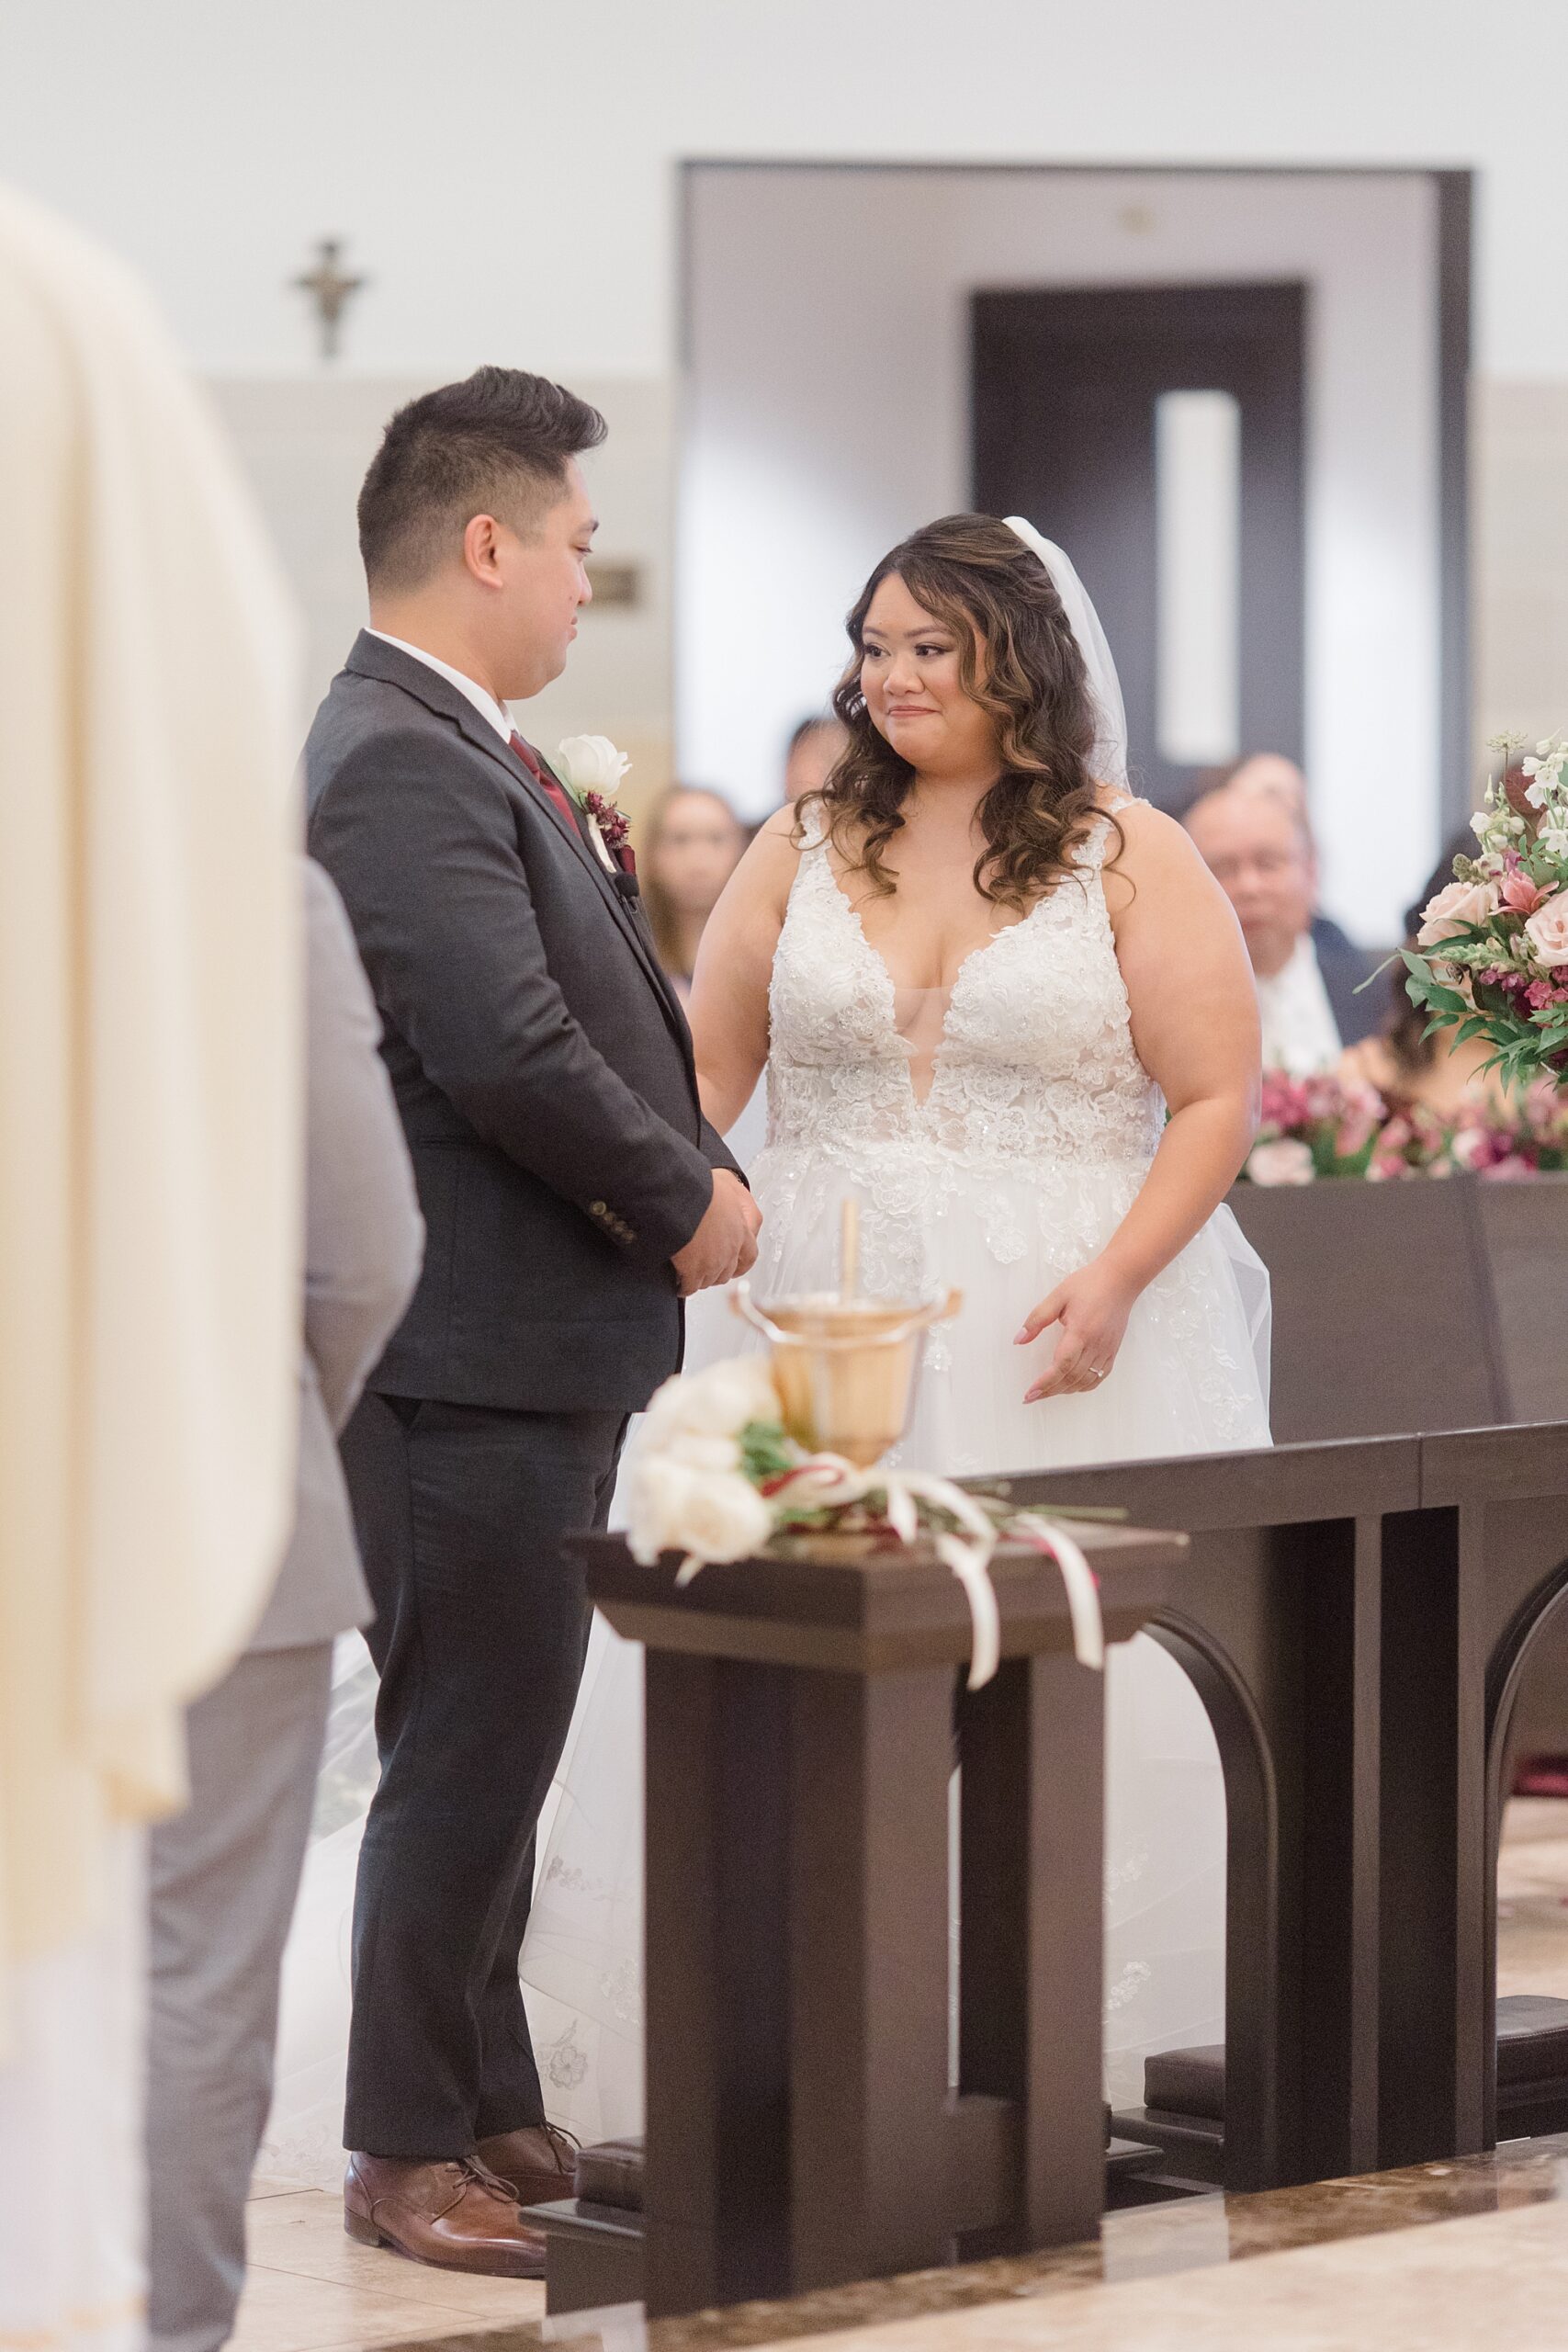 bride and groom smile together during ceremony at St. Francis of Assisi Catholic Church Frisco